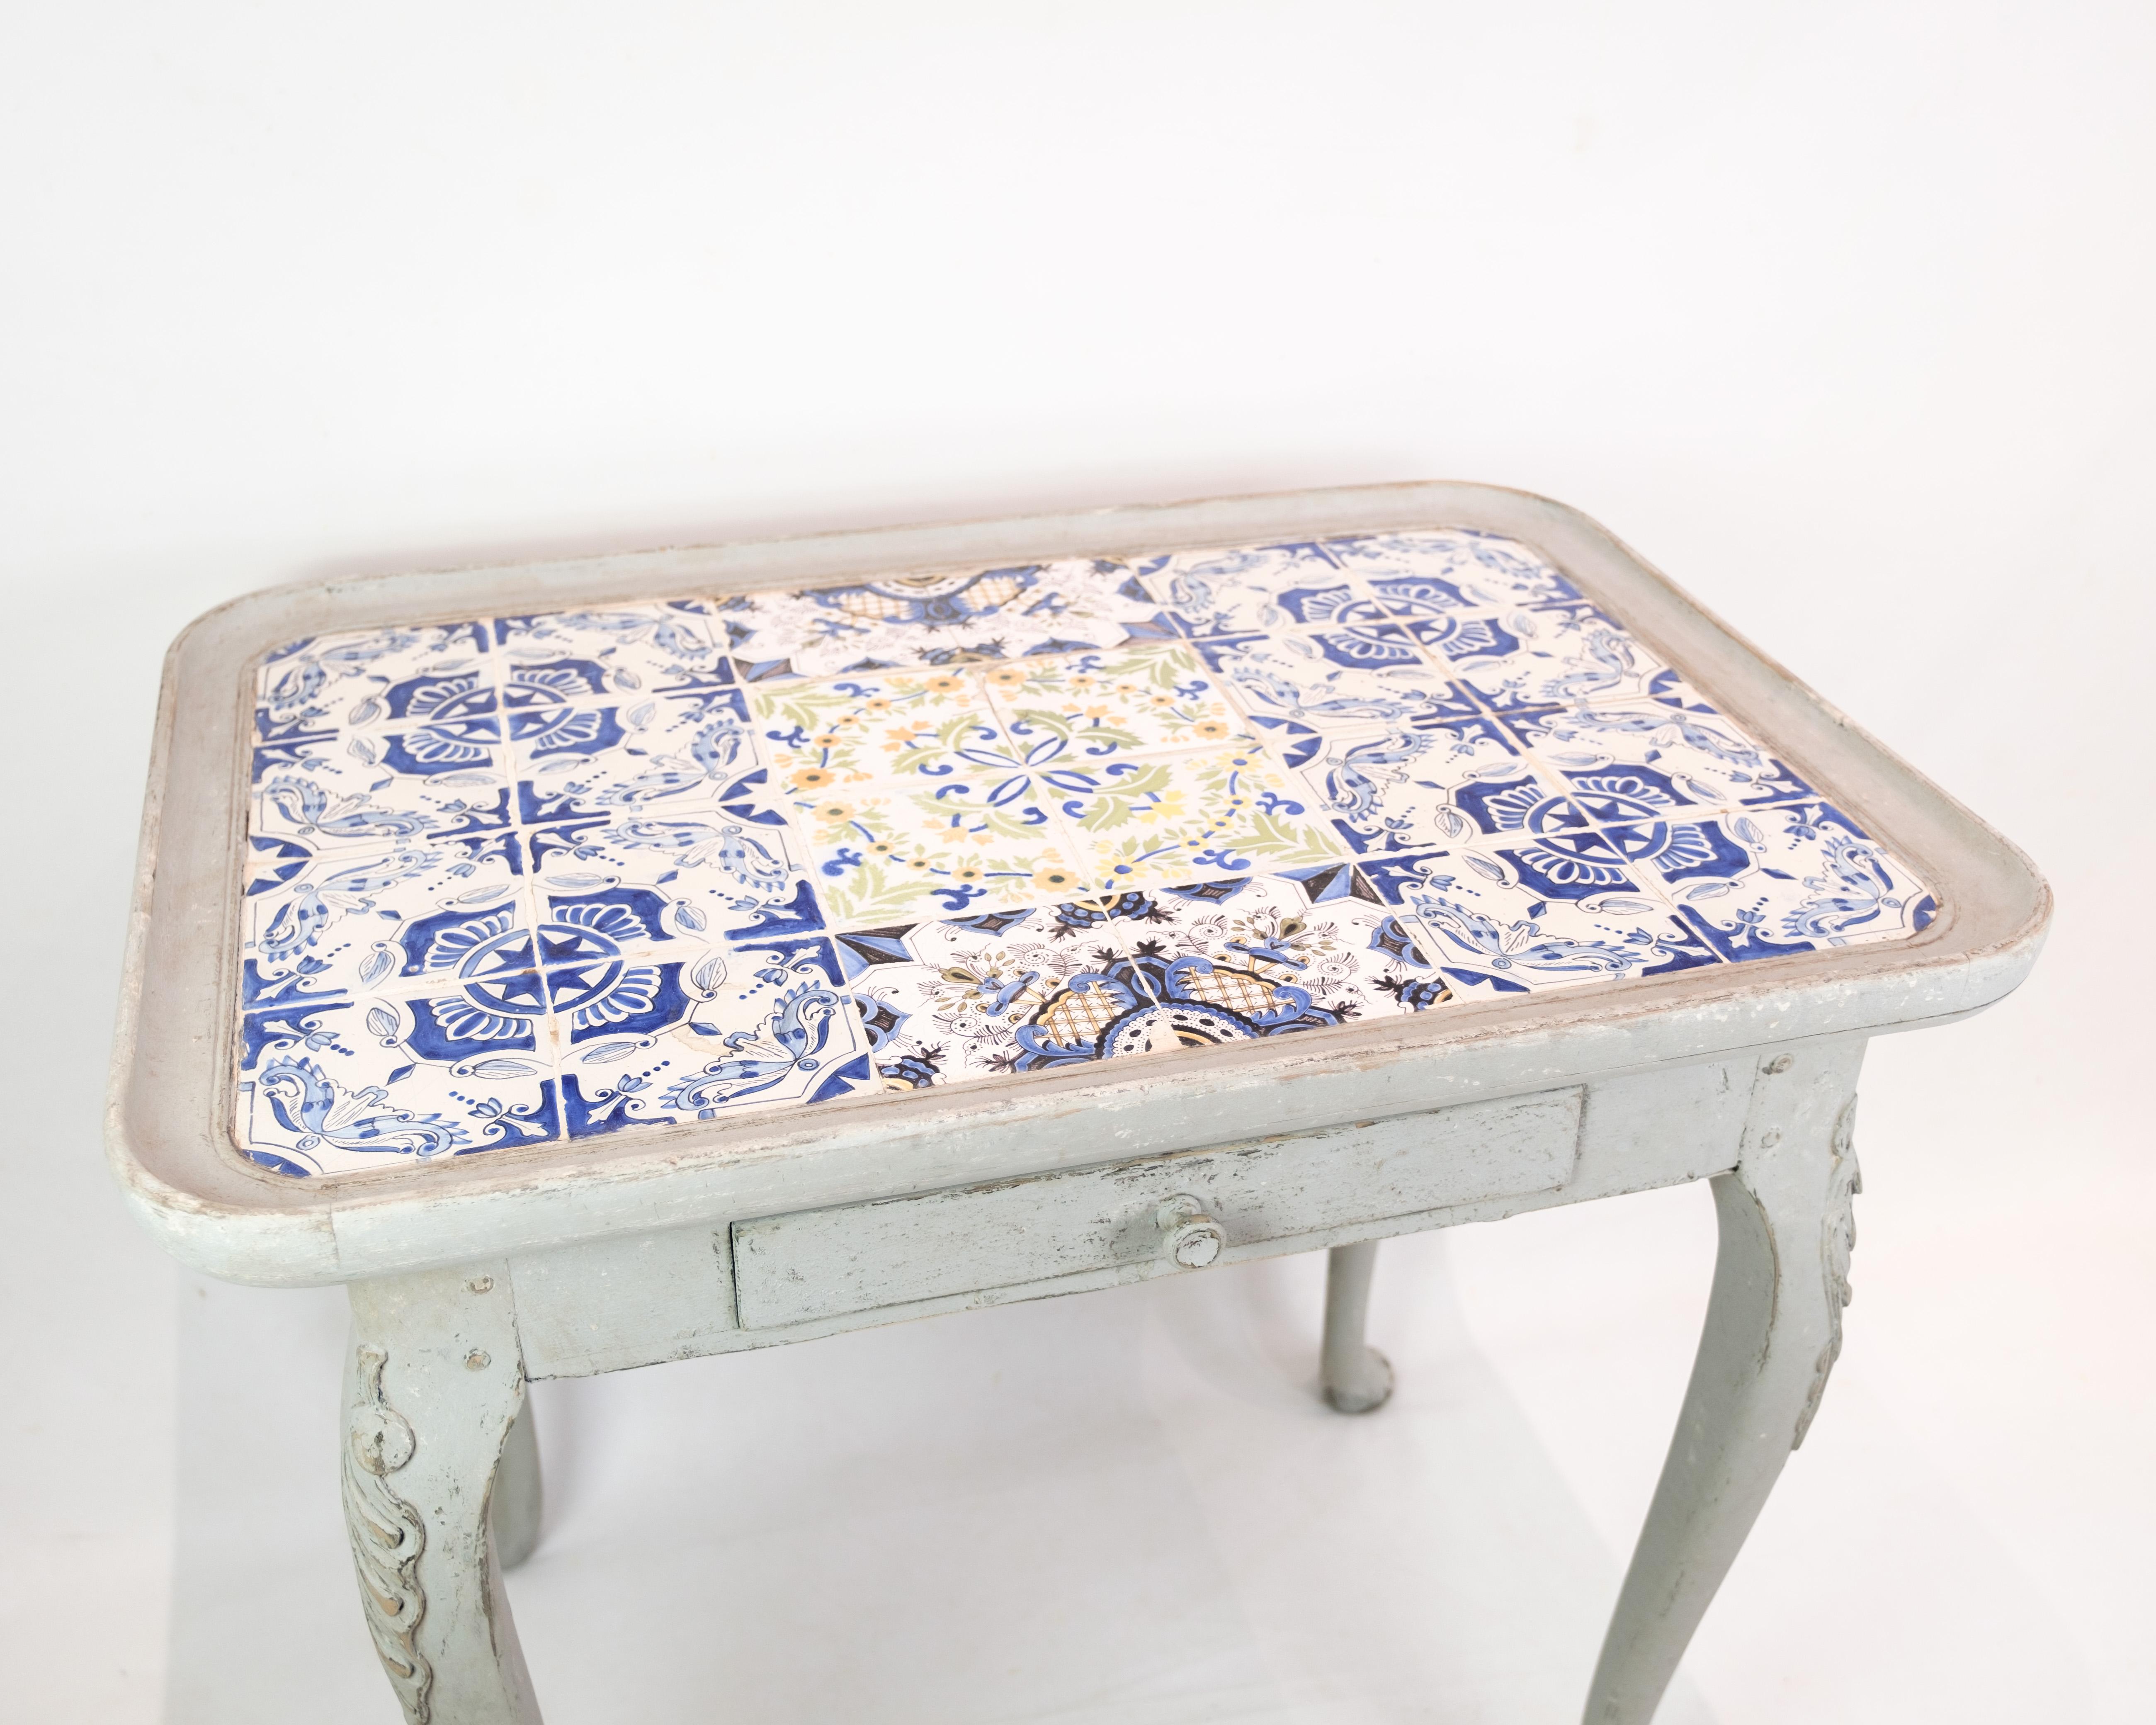 The rococo tile table, painted gray and dated 1780, is a charming example of classic furniture design. Its elegantly curved forms and refined detailing are characteristic of the period and add a historical charm to any room. This timeless piece of